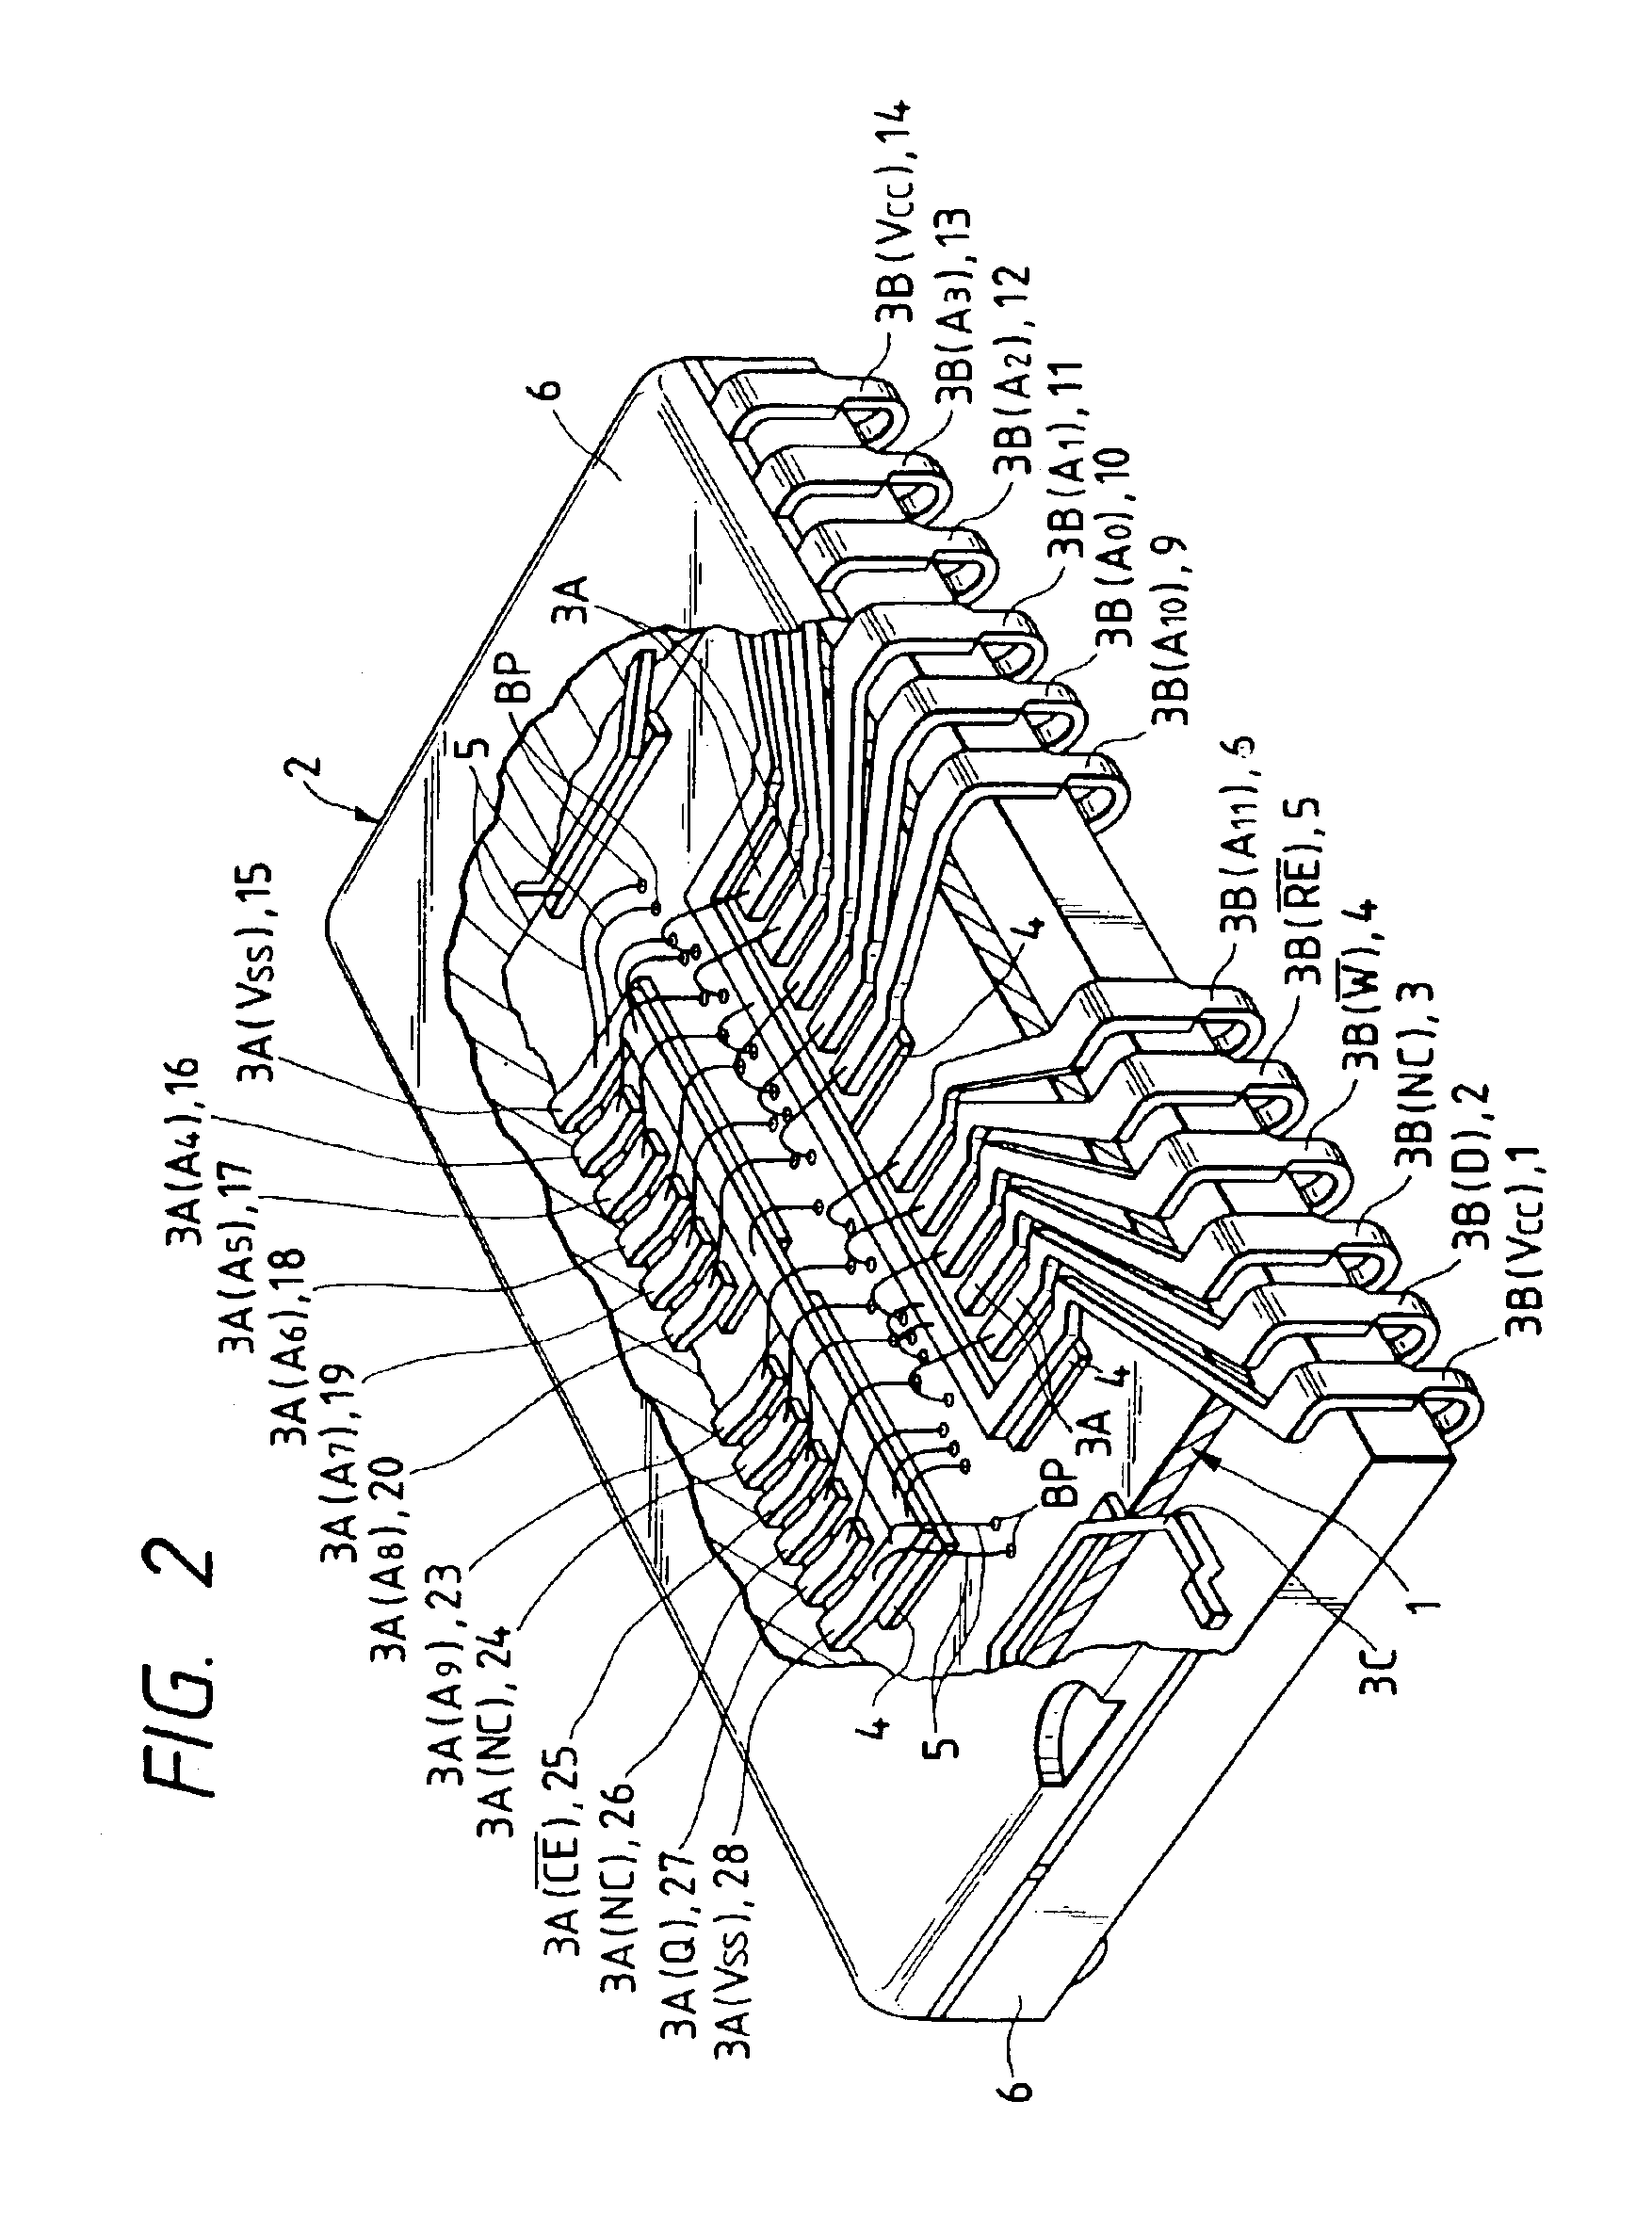 Semiconductor integrated circuit device, process for fabricating the same, and apparatus for fabricating the same